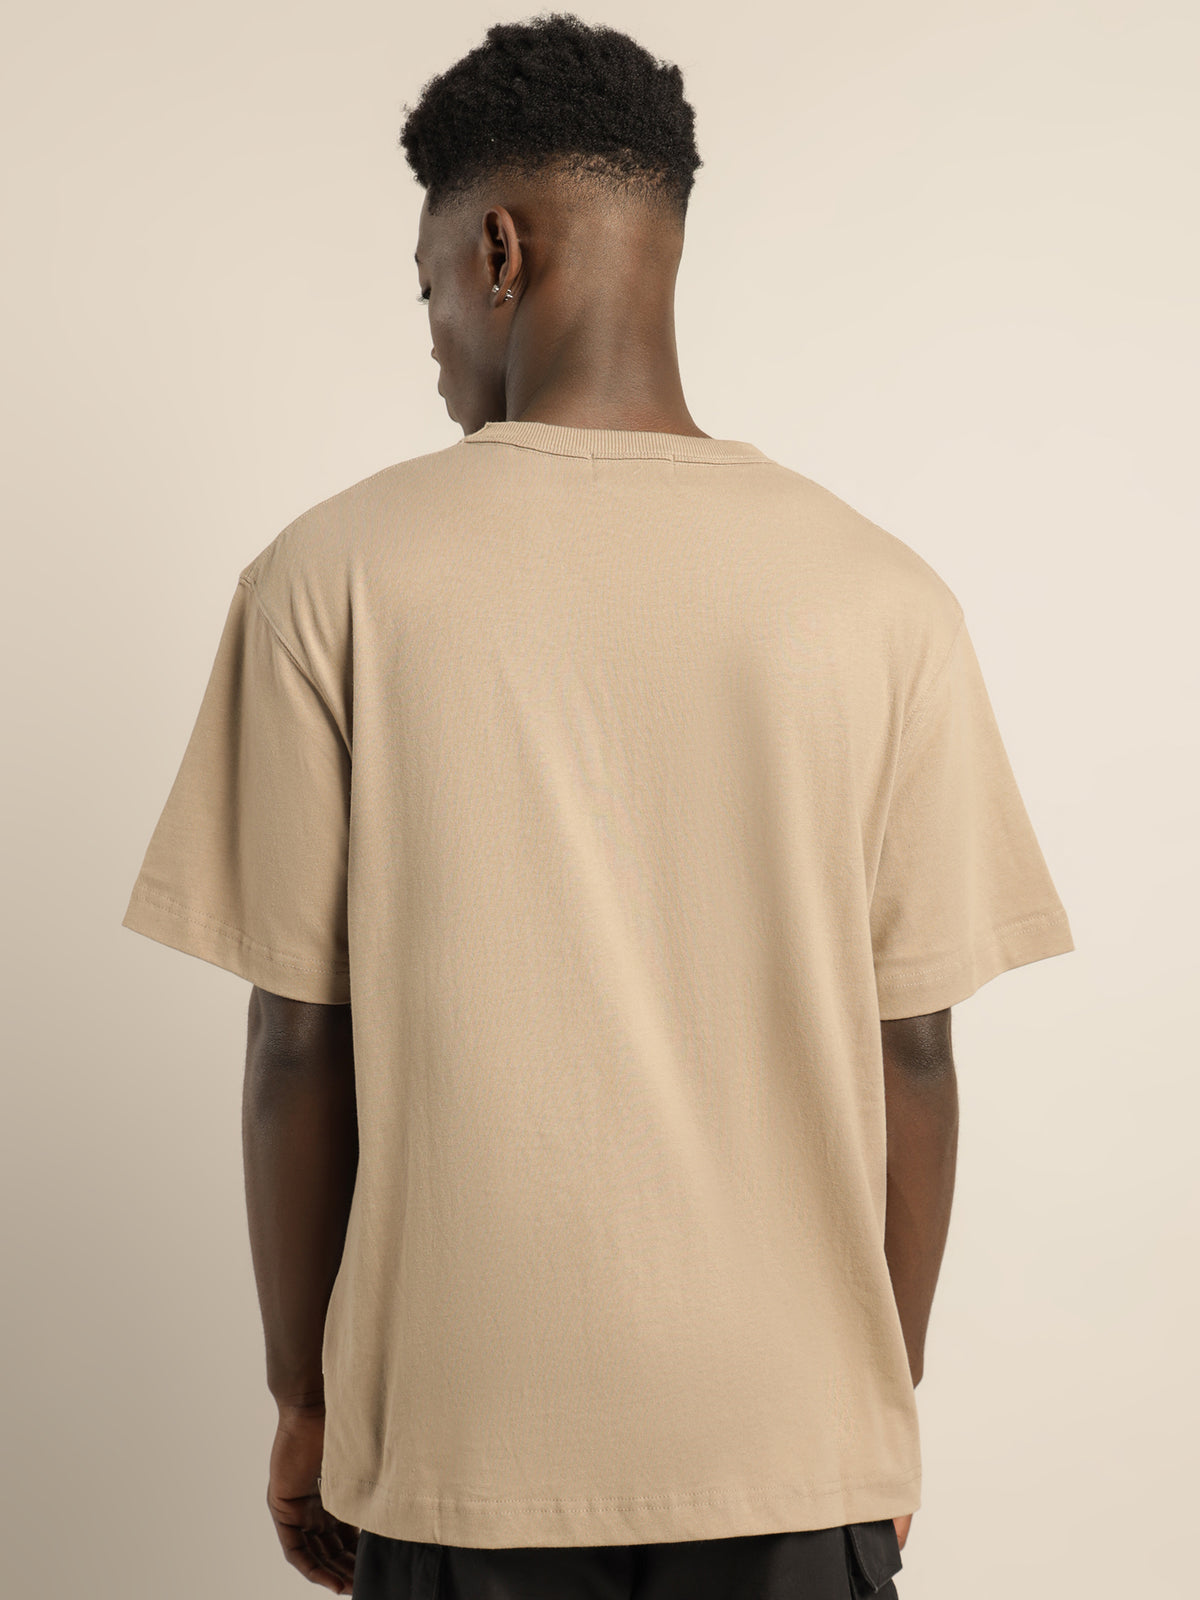 Heavyweight Crew T-Shirt in Beige Taupe